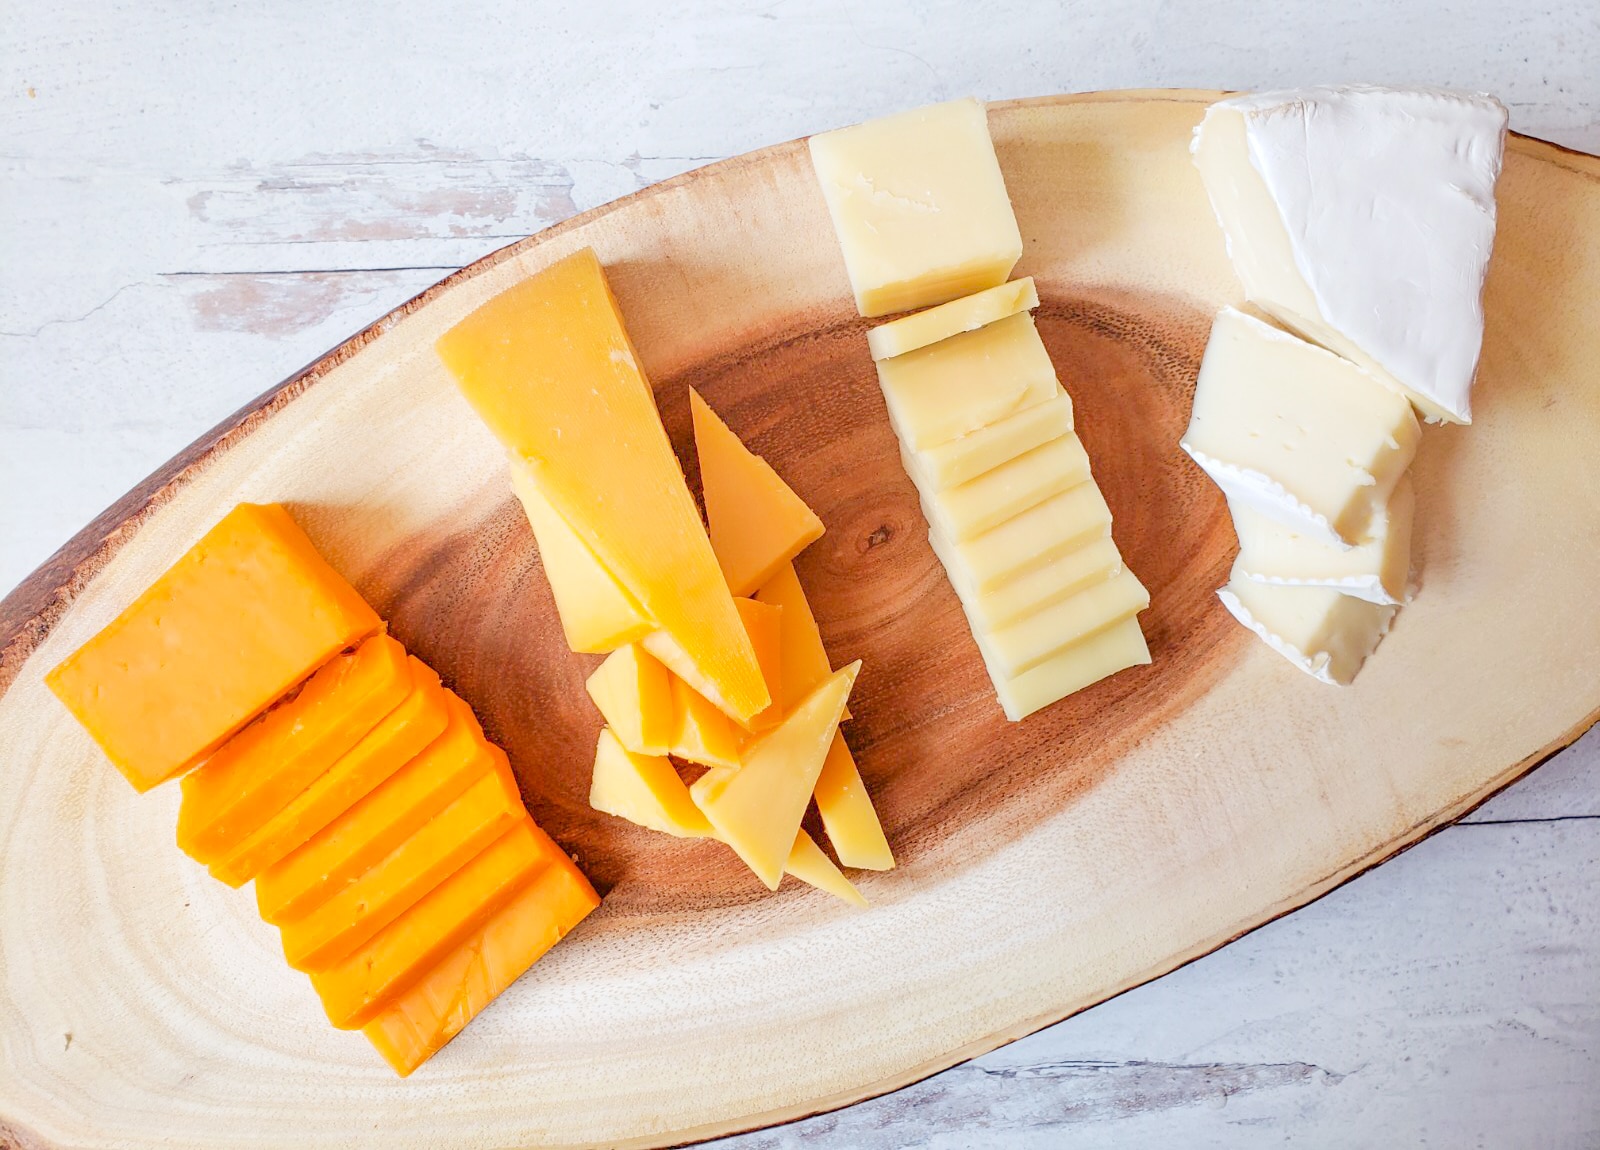 a wooden cheese board with 4 types of cheese sliced and laid on it